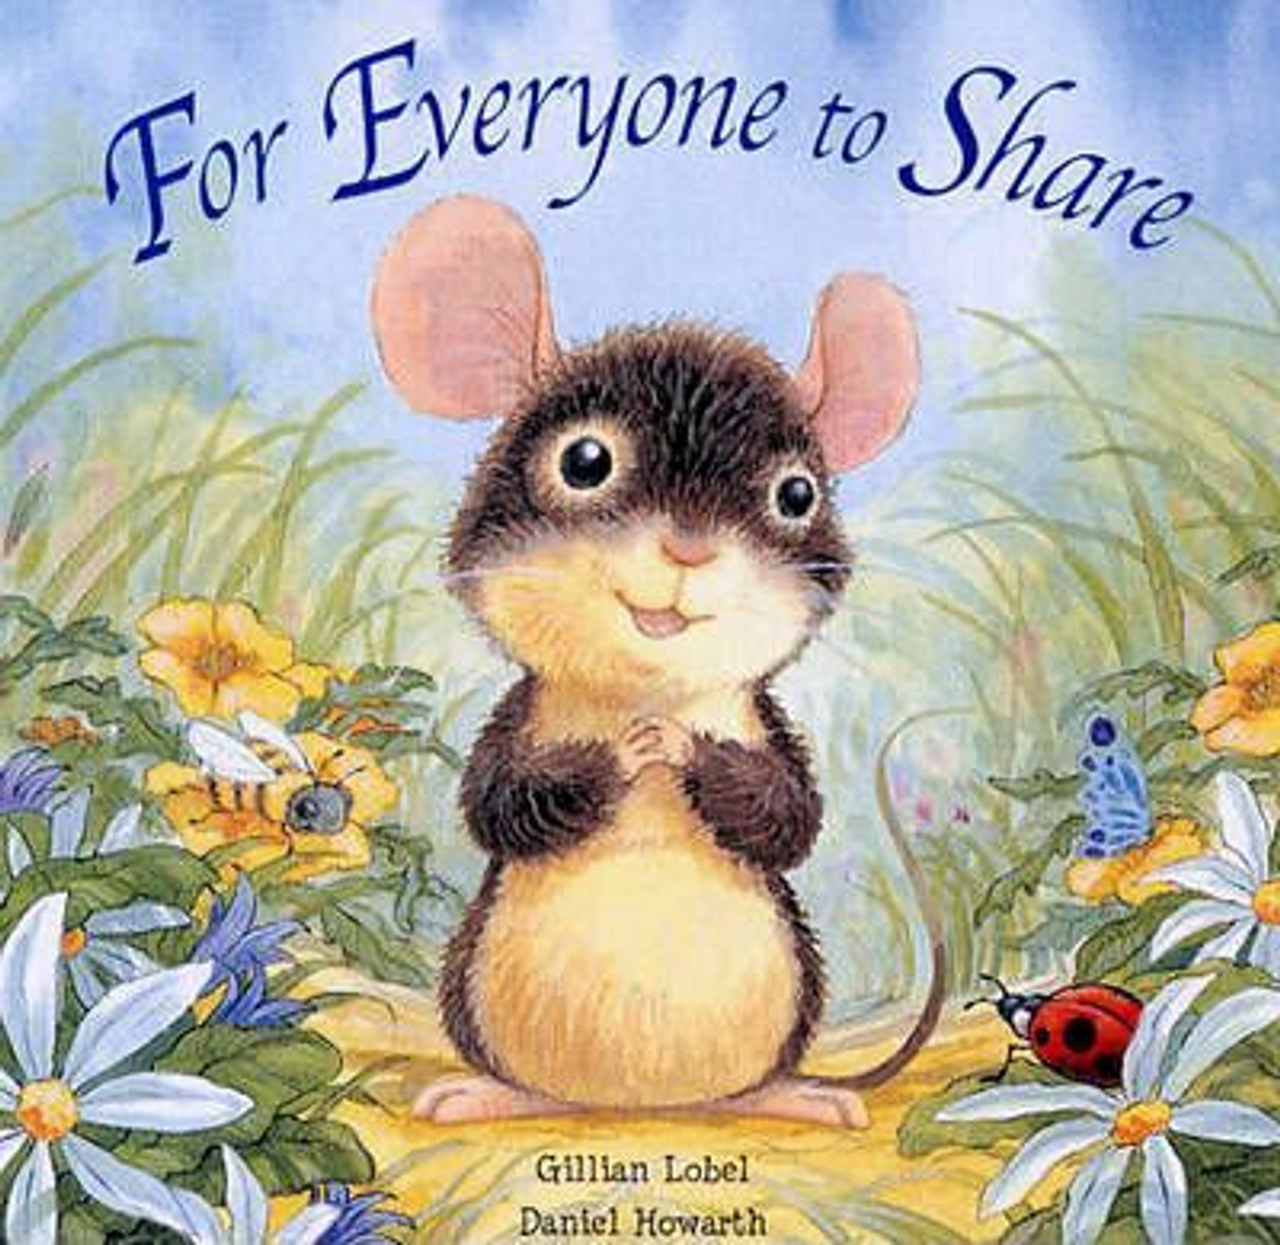 Lobel Gill / For Everyone To Share (Children's Picture Book)